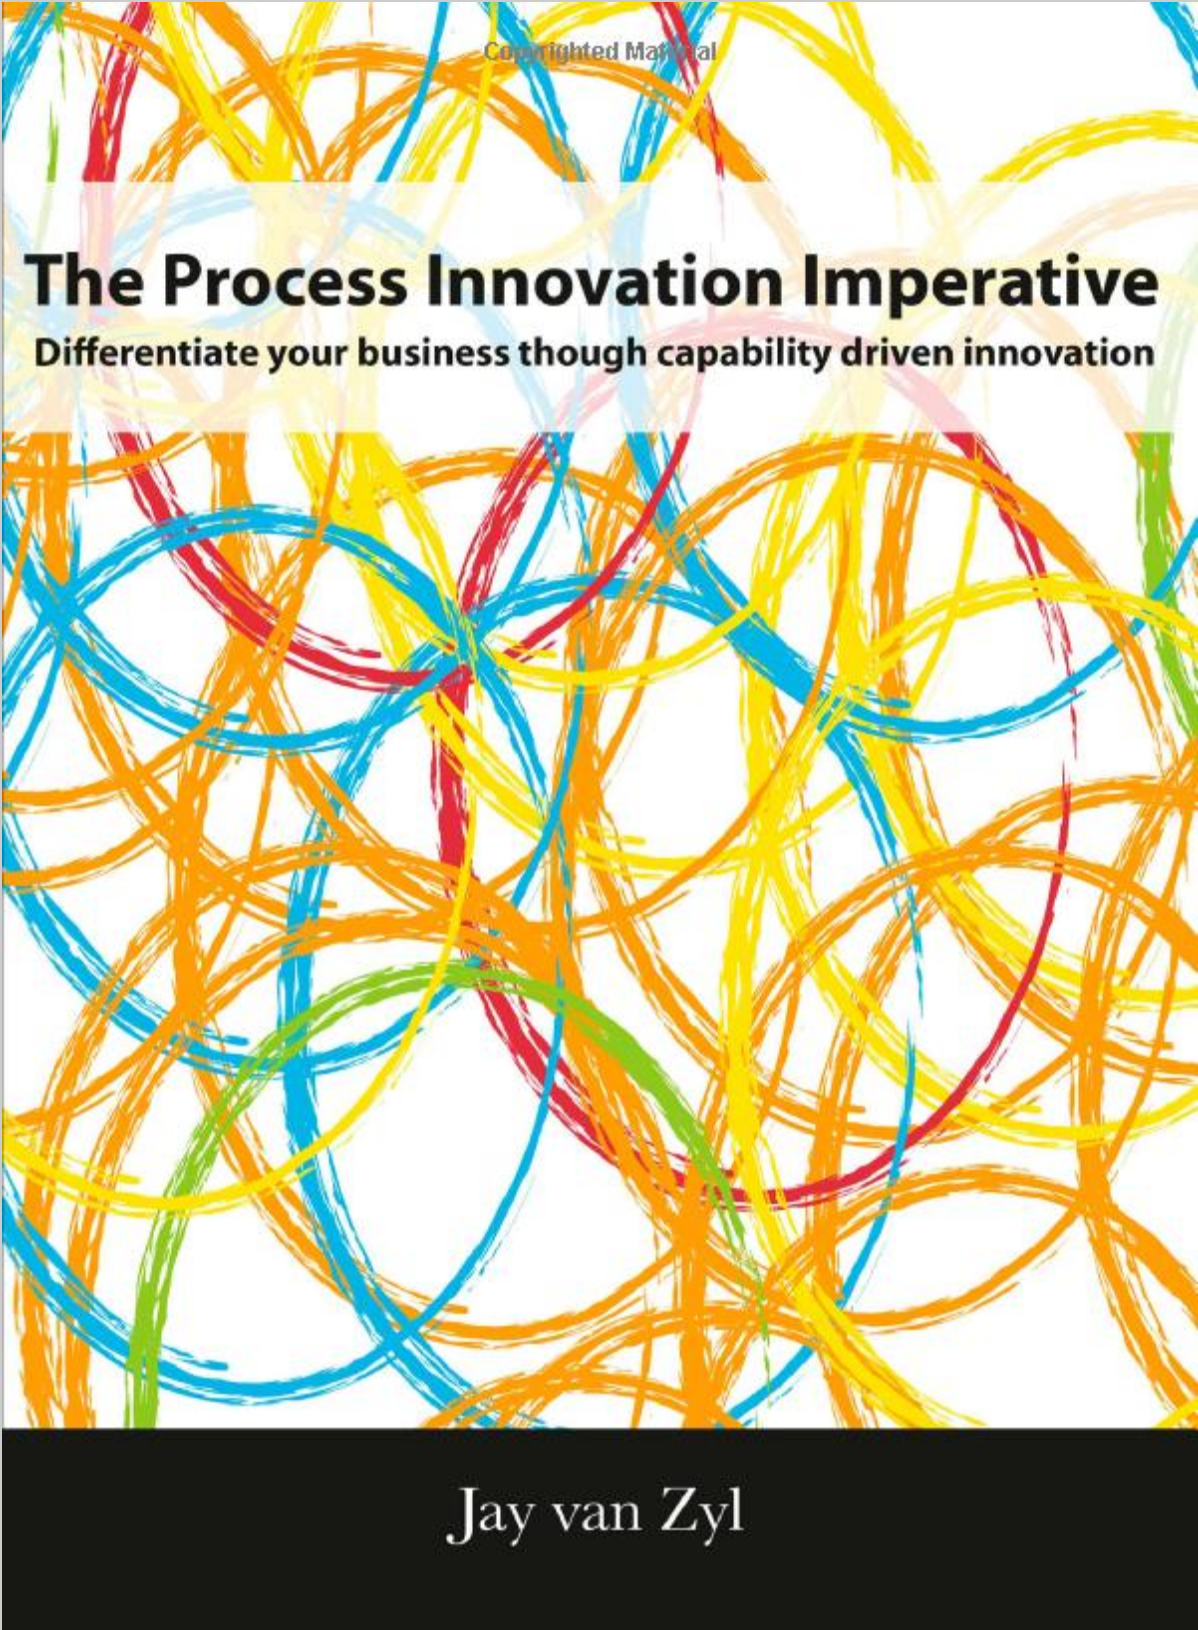 Process Innovation Imperative: Differentiate your Business through Capability Driven Innovation by Jay van Zyl